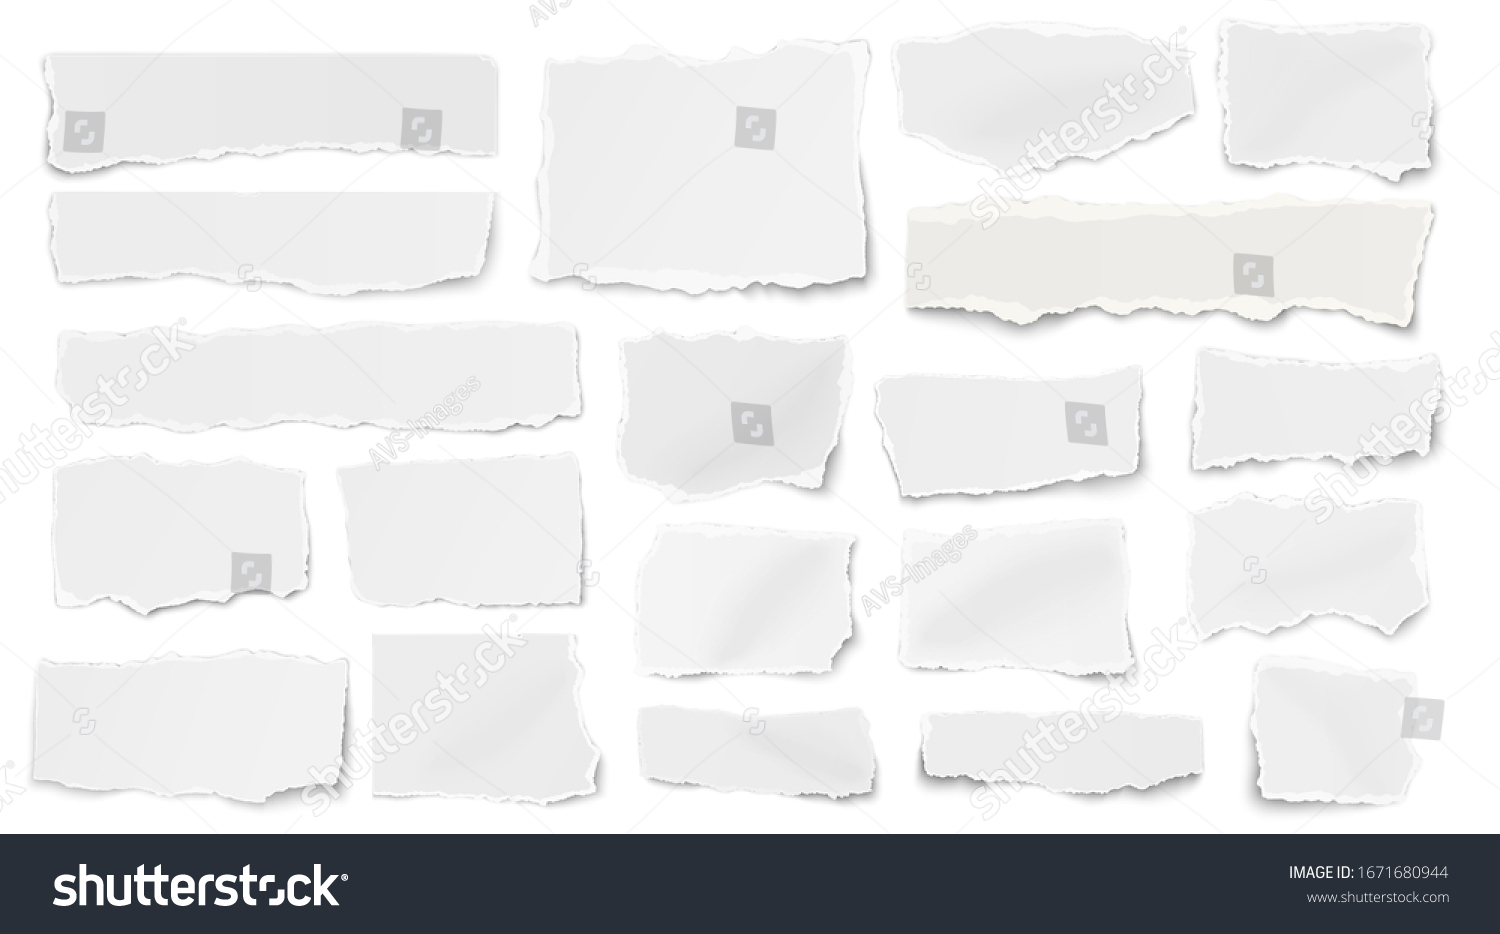 Set of paper different shapes ripped scraps fragments wisps isolated on white background. Vector illustration. #1671680944